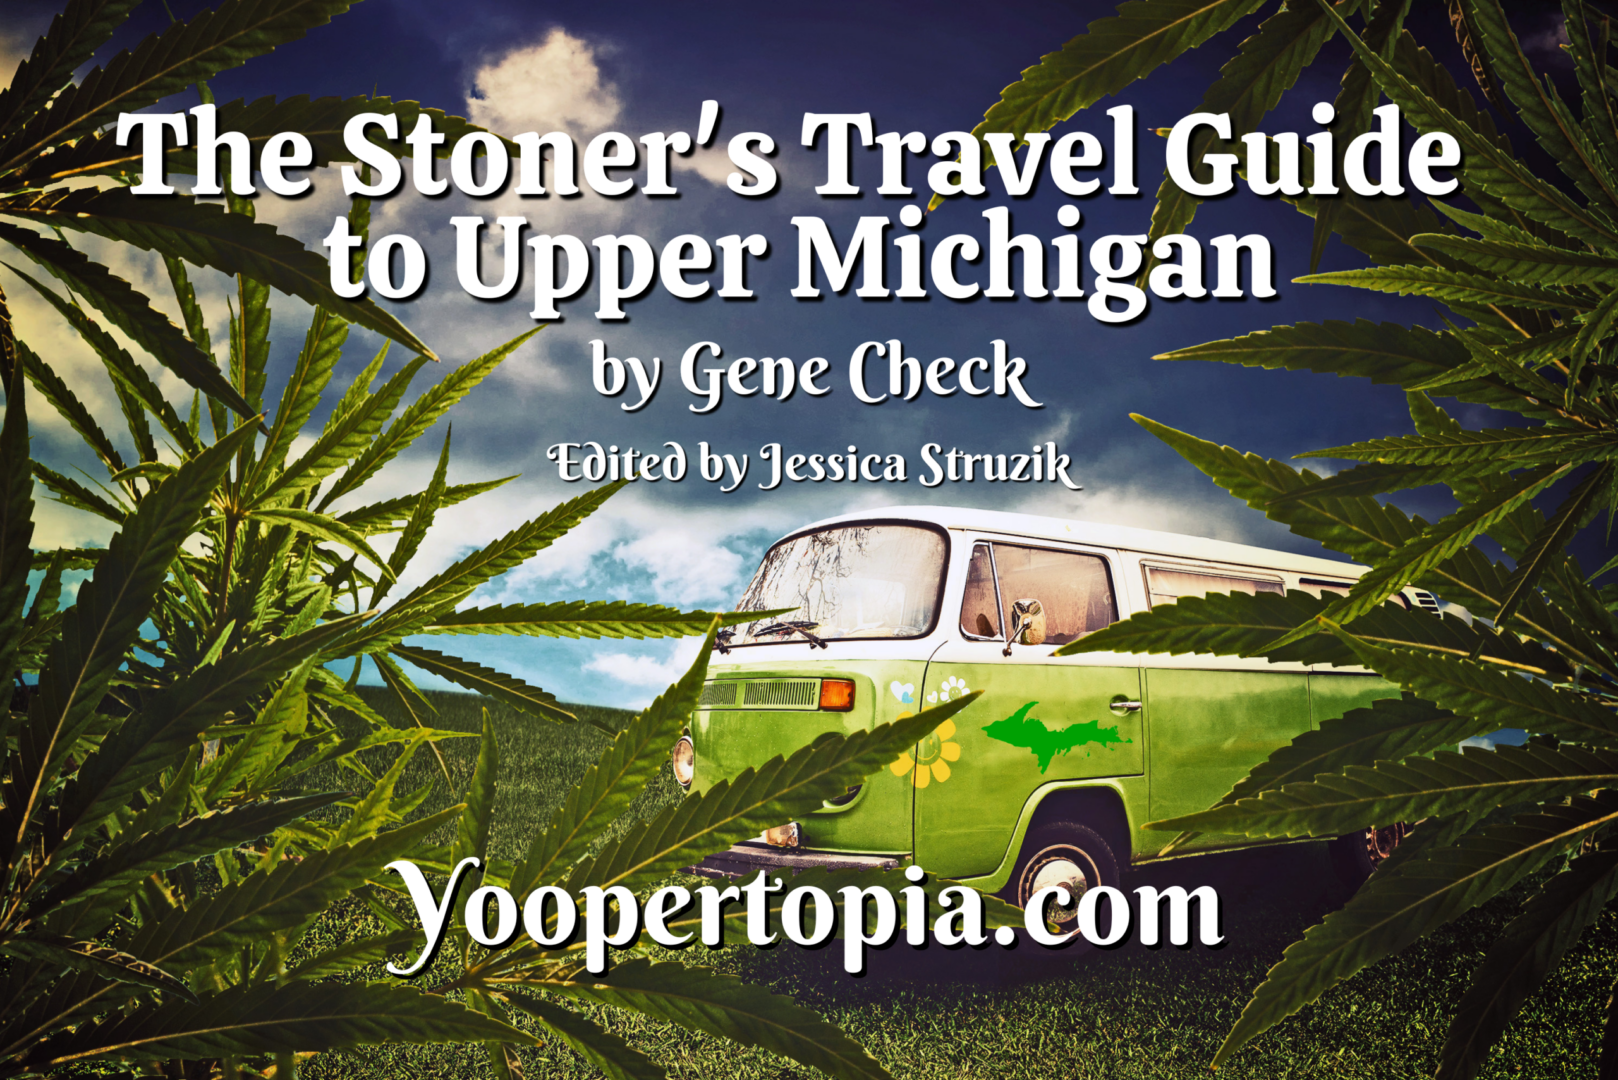 The Stoner's Travel Guide to Upper Michigan by Gene Check - Edited by Jessica Struzik